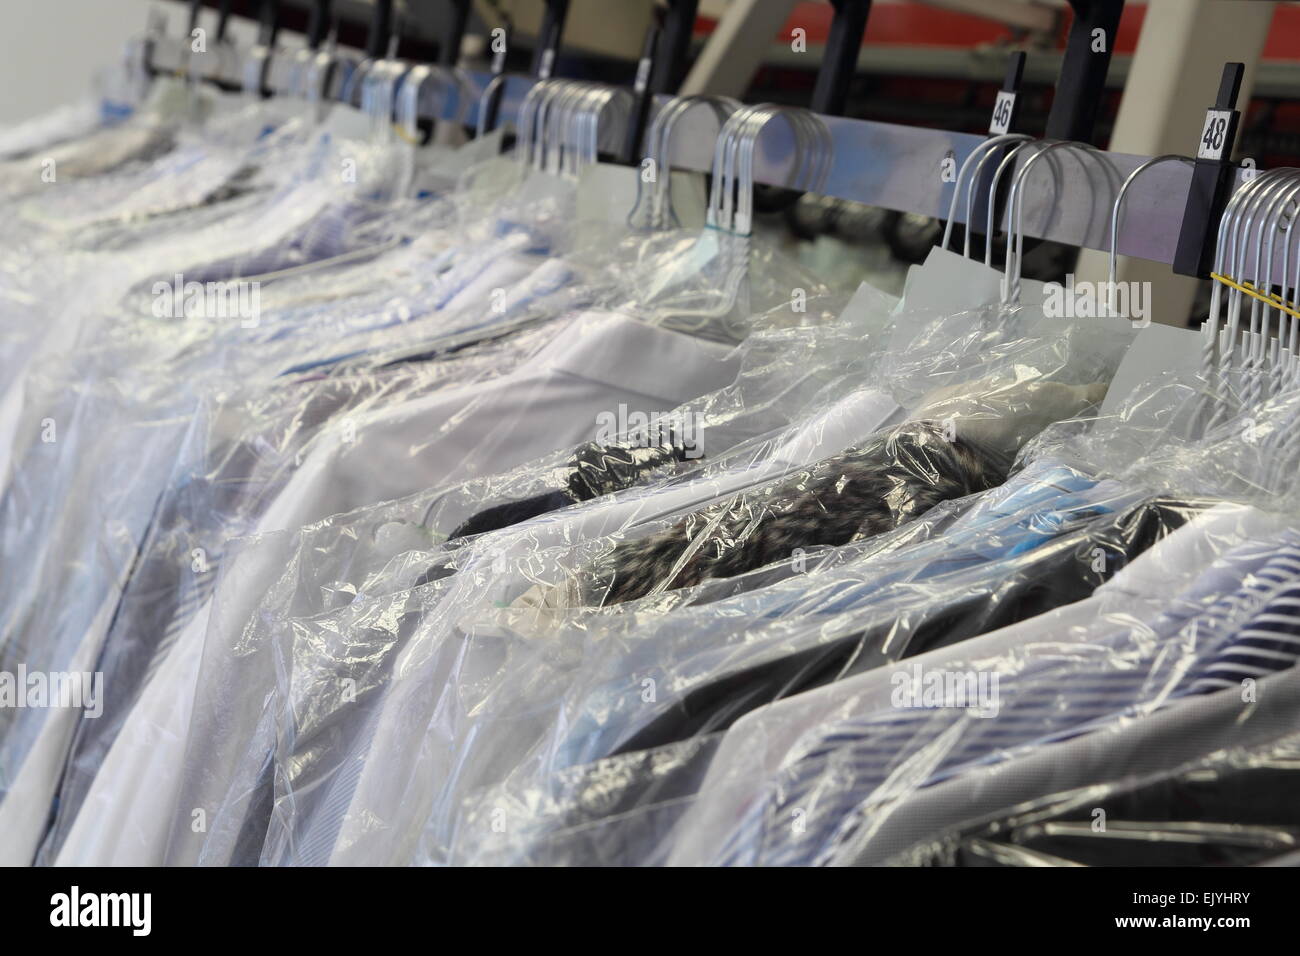 A Clothes Rack in a Dry Cleaning Stock Photo